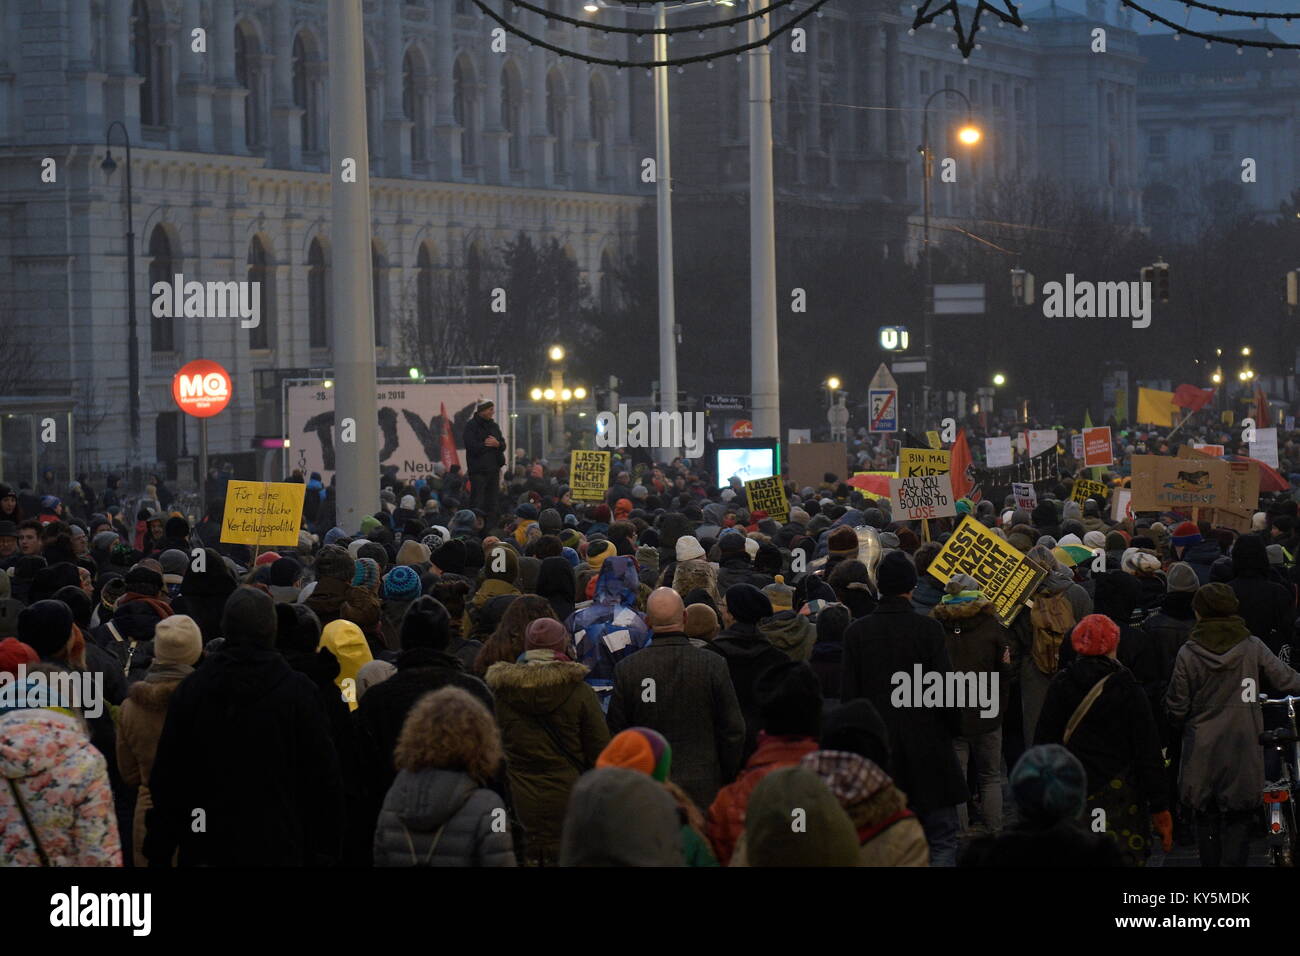 Vienna, Austria. January 13, 2018. Left-wing government opponents call for a major demonstration against black and blue(FPÖ Freedom Party Austria and ÖVP). Credit: Franz Perc/Alamy Live News Stock Photo